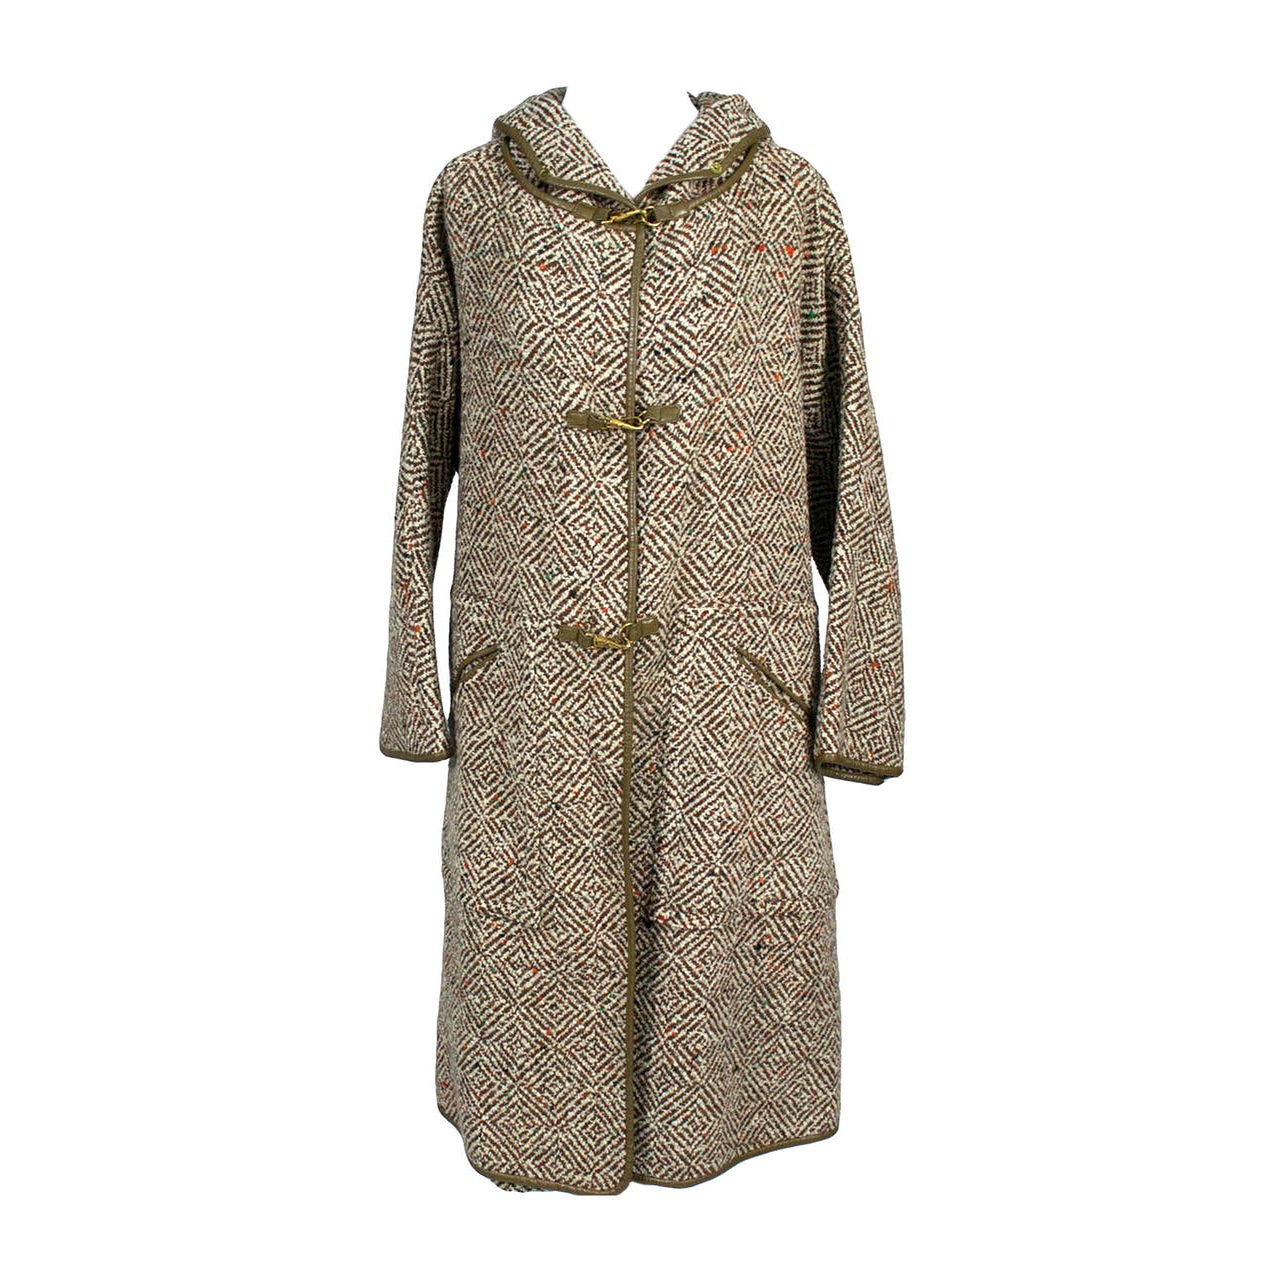 1960s Vintage Bonnie Cashin Suit Sills And Co Hooded Tweed Coat & Slim Skirt